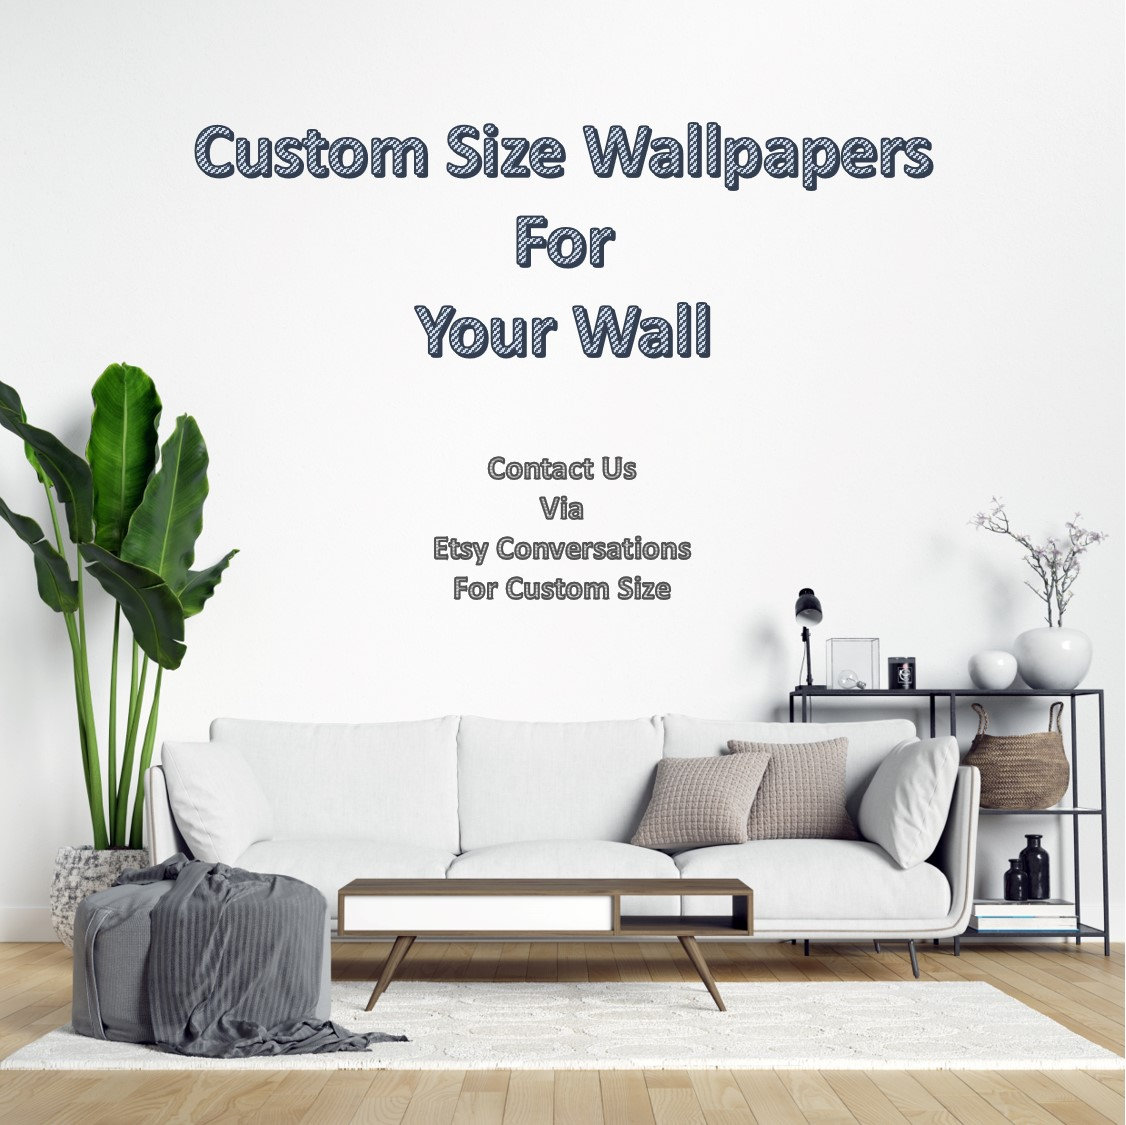 Conversation Fabric, Wallpaper and Home Decor